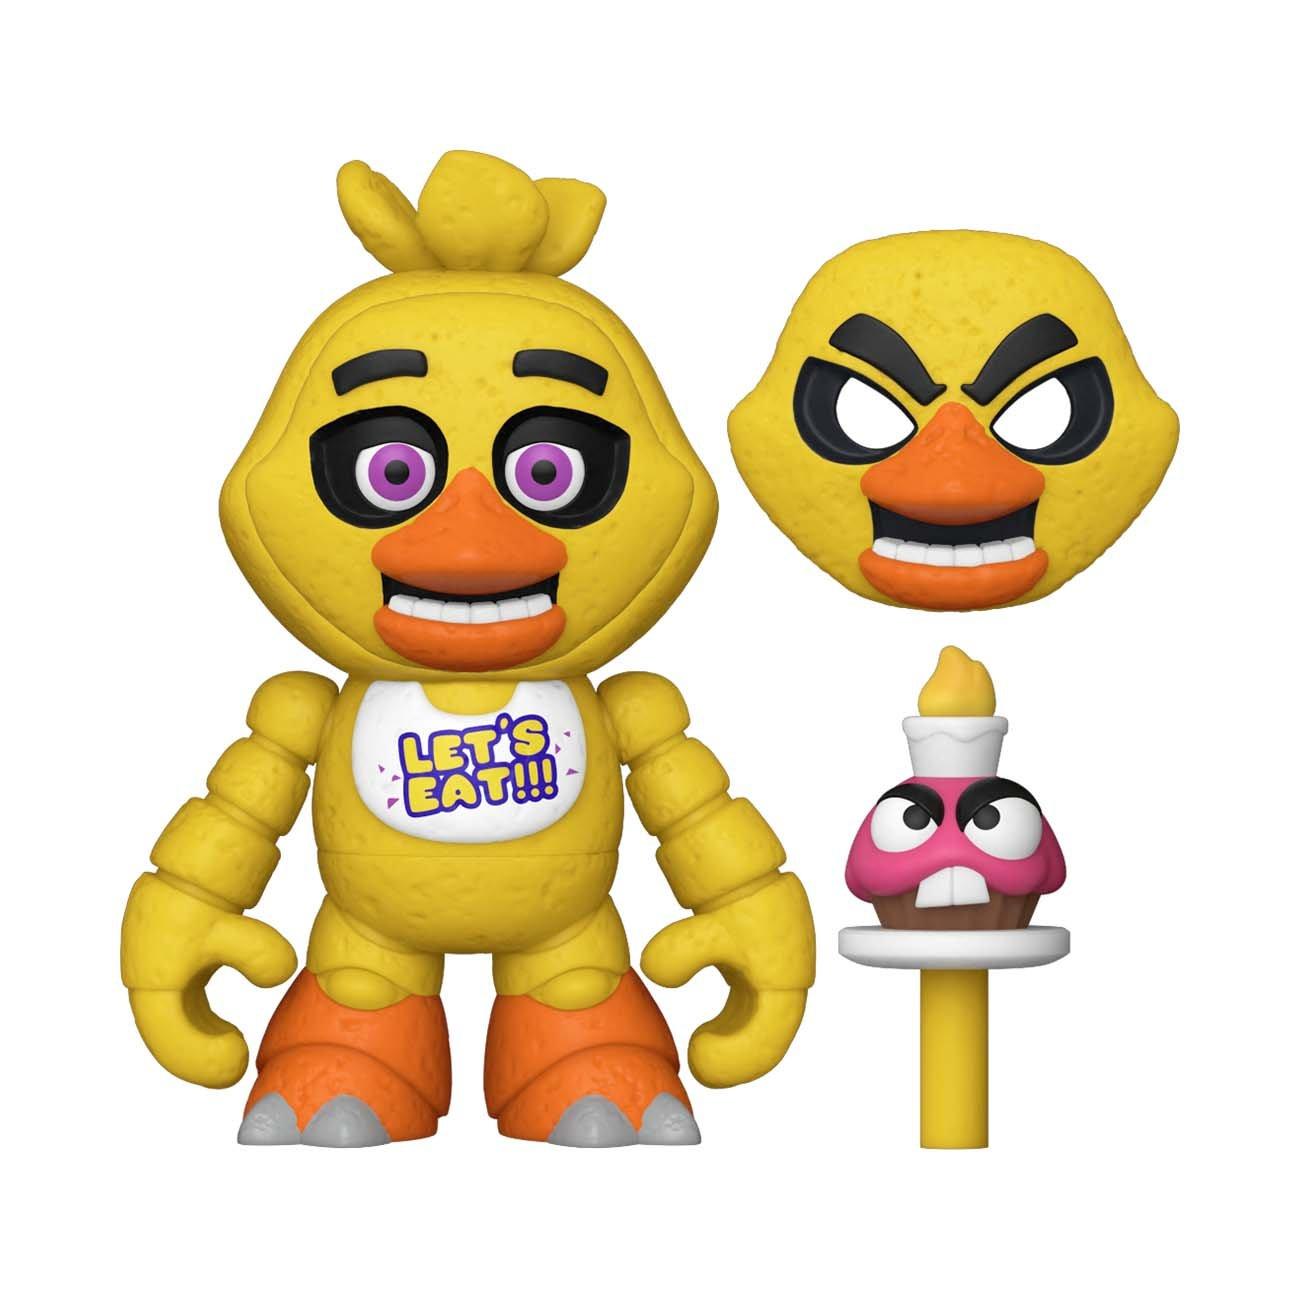 Funko Snaps! Five Nights at Freddy's Chica Vinyl Playset